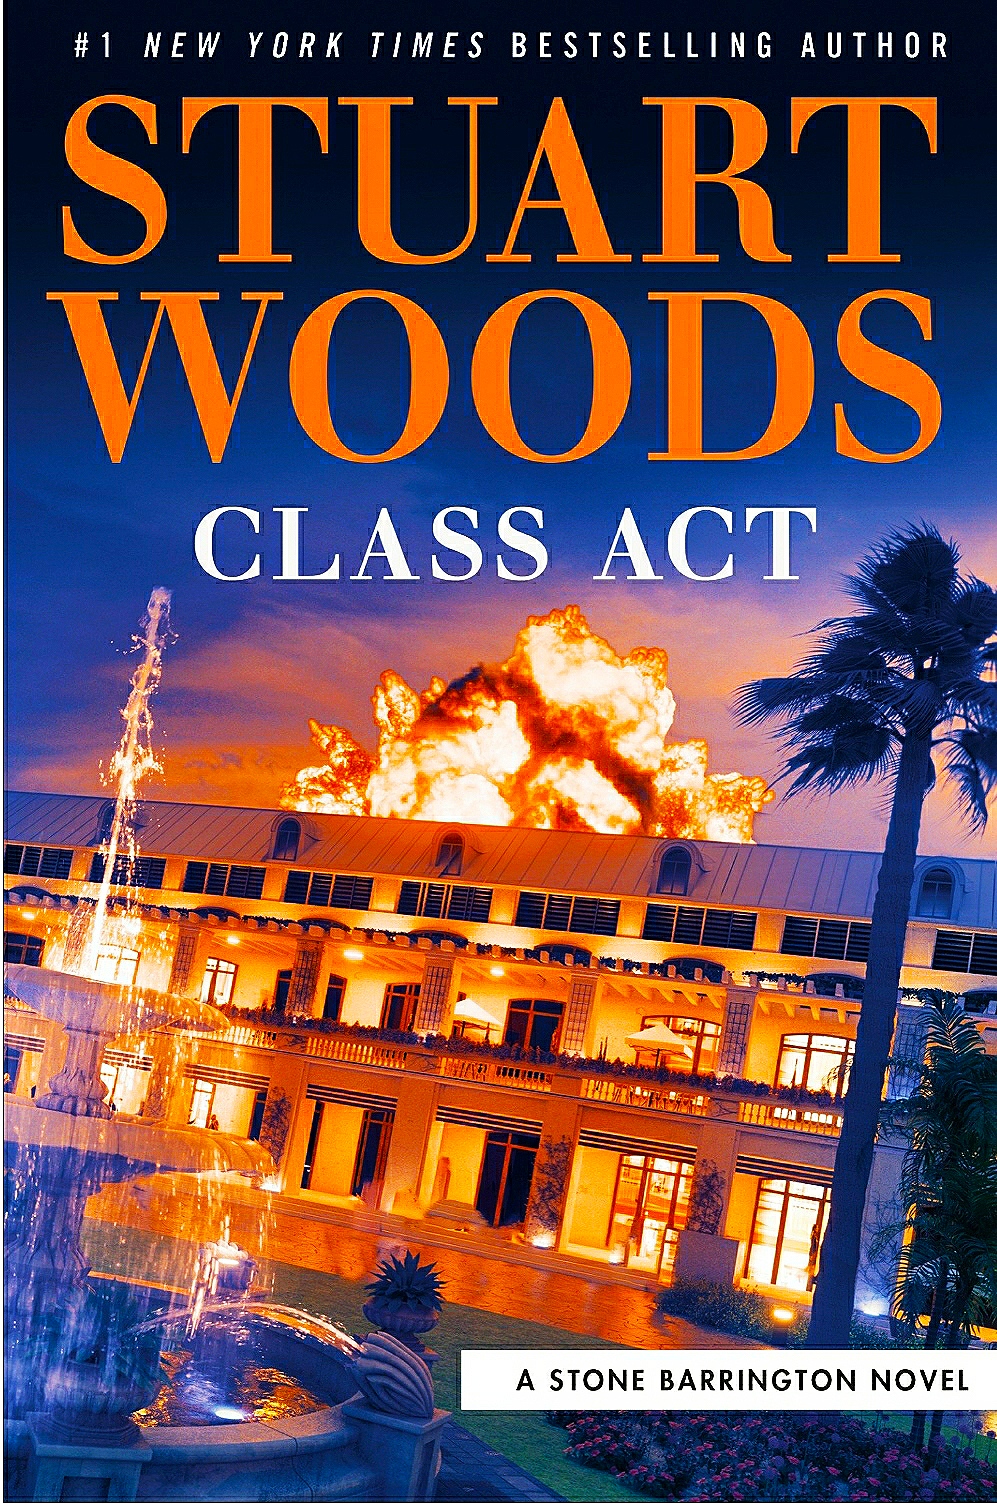 Books – Review of Class Act by Stuart Woods – 2021 – An Average Quality Novel